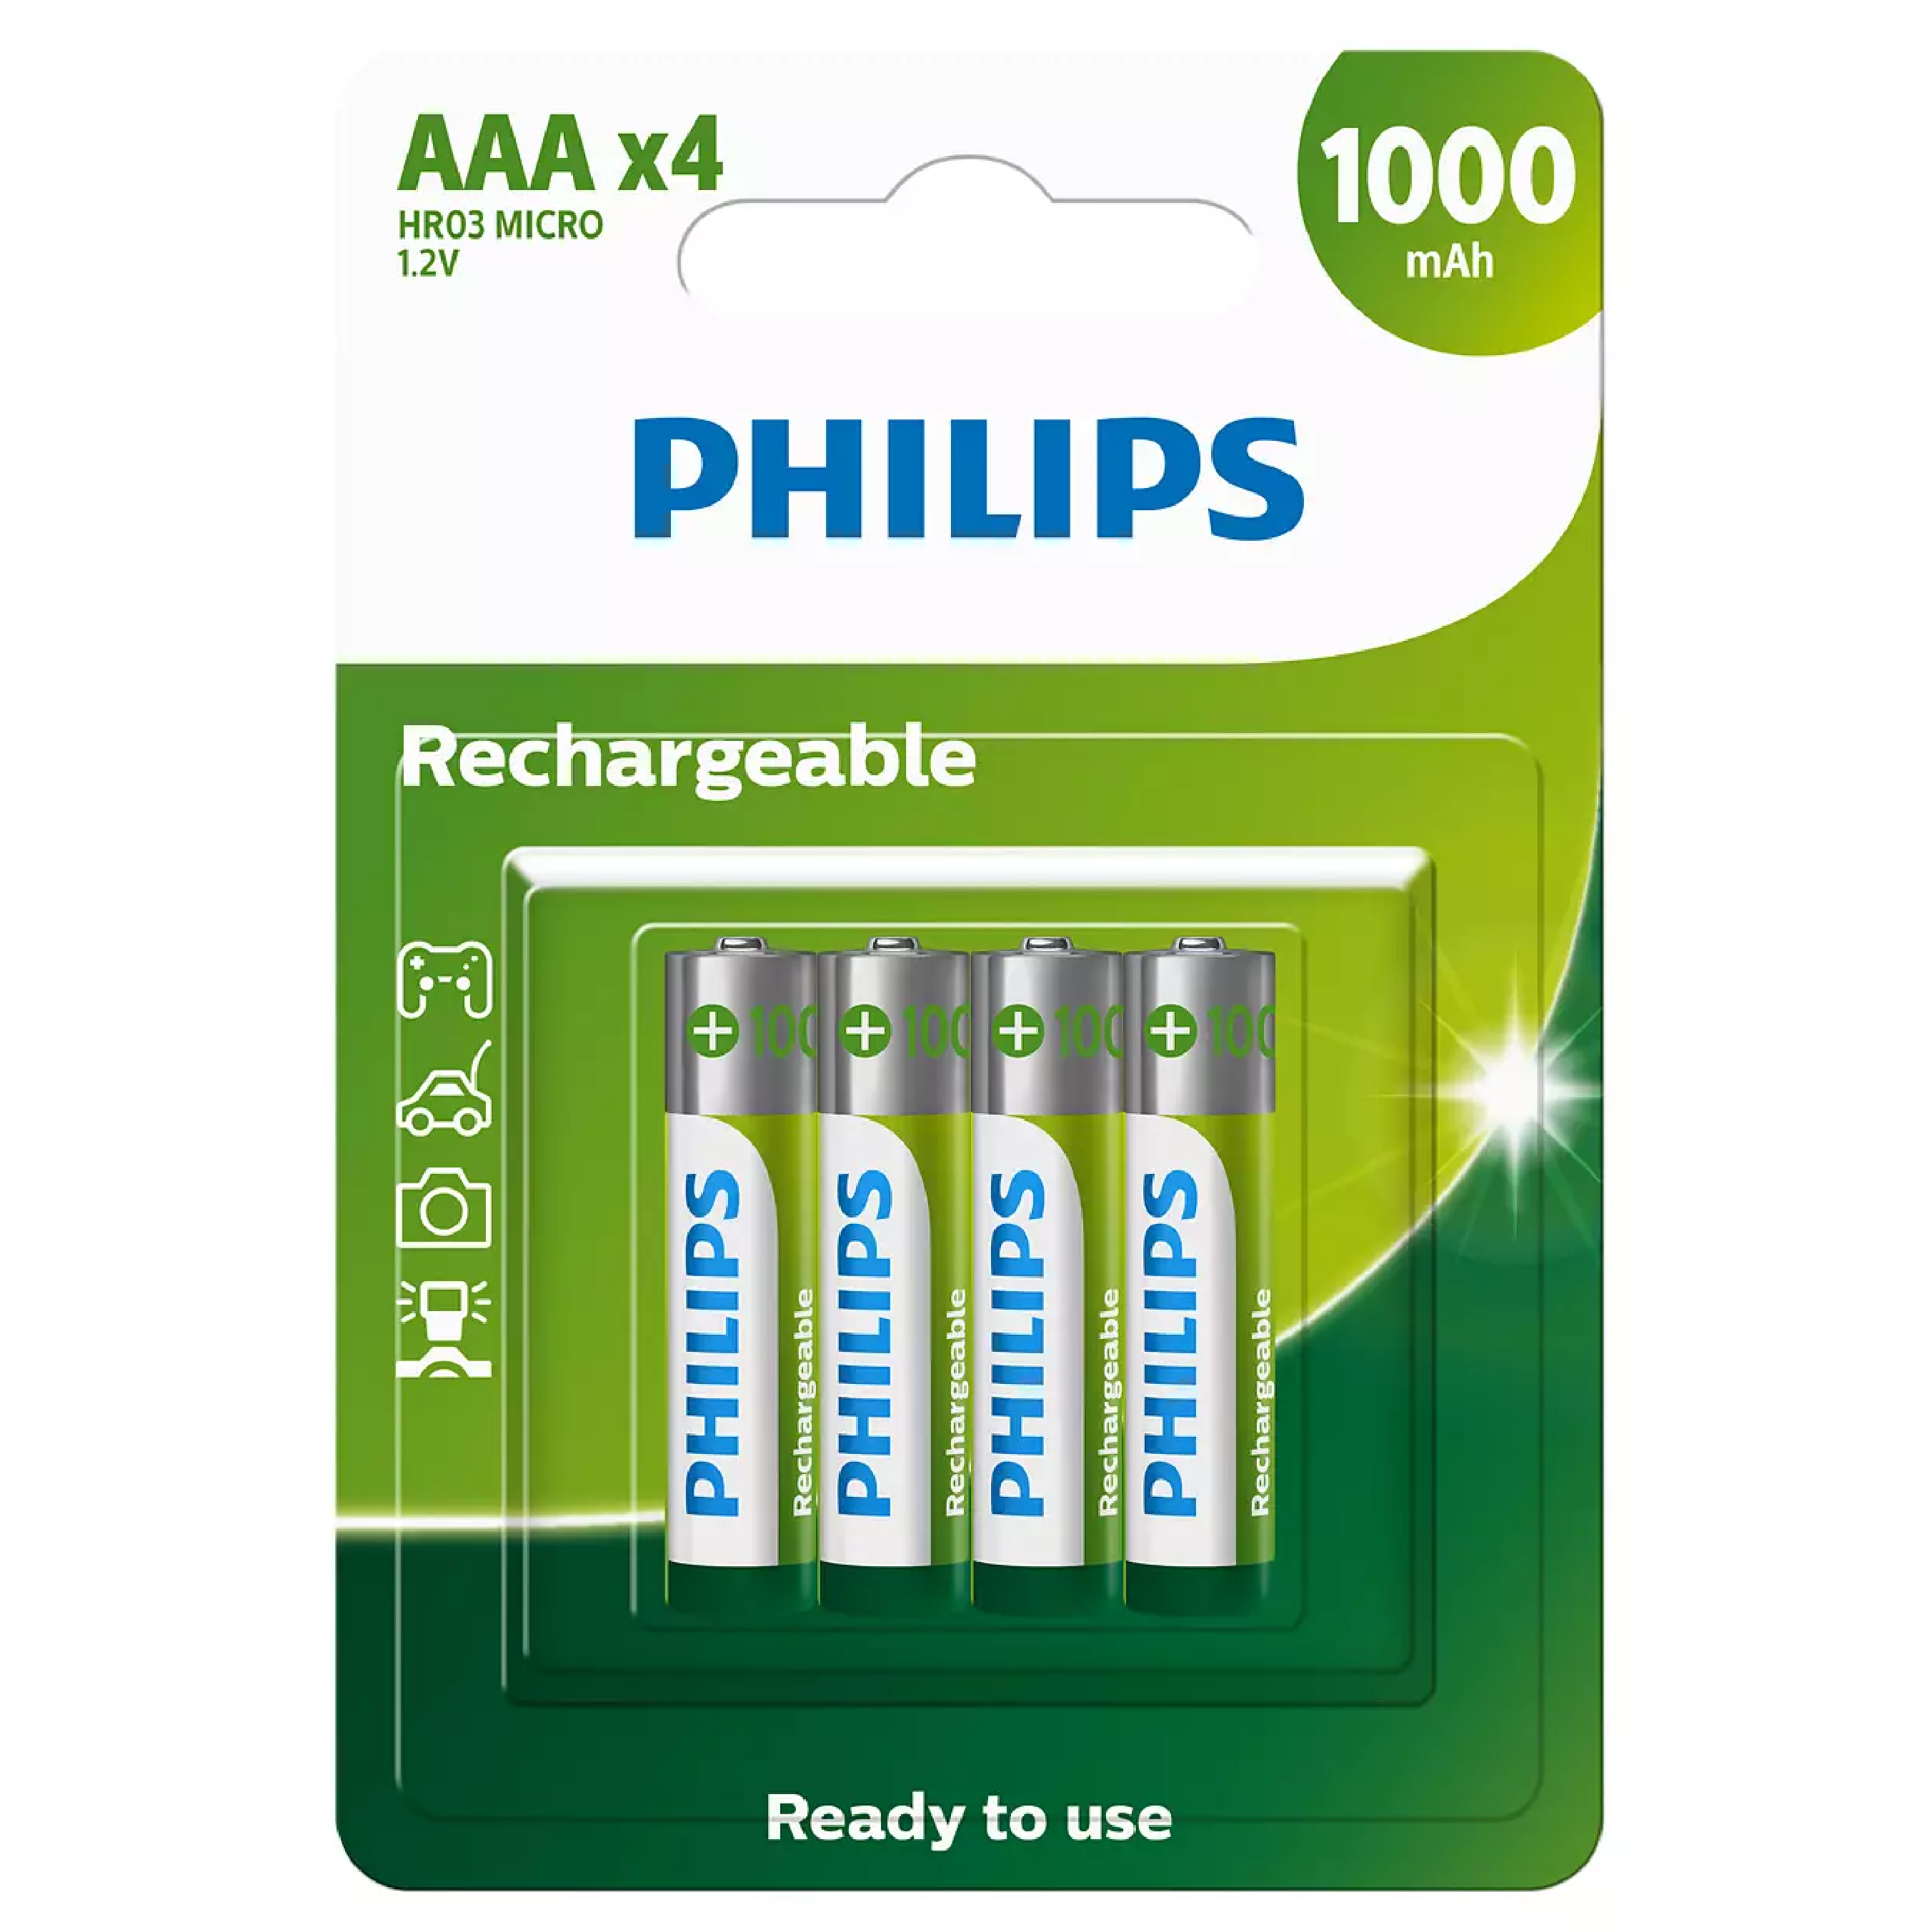 Philips 4AAA 1000mAh Rechargeable Battery 4PC/PACK